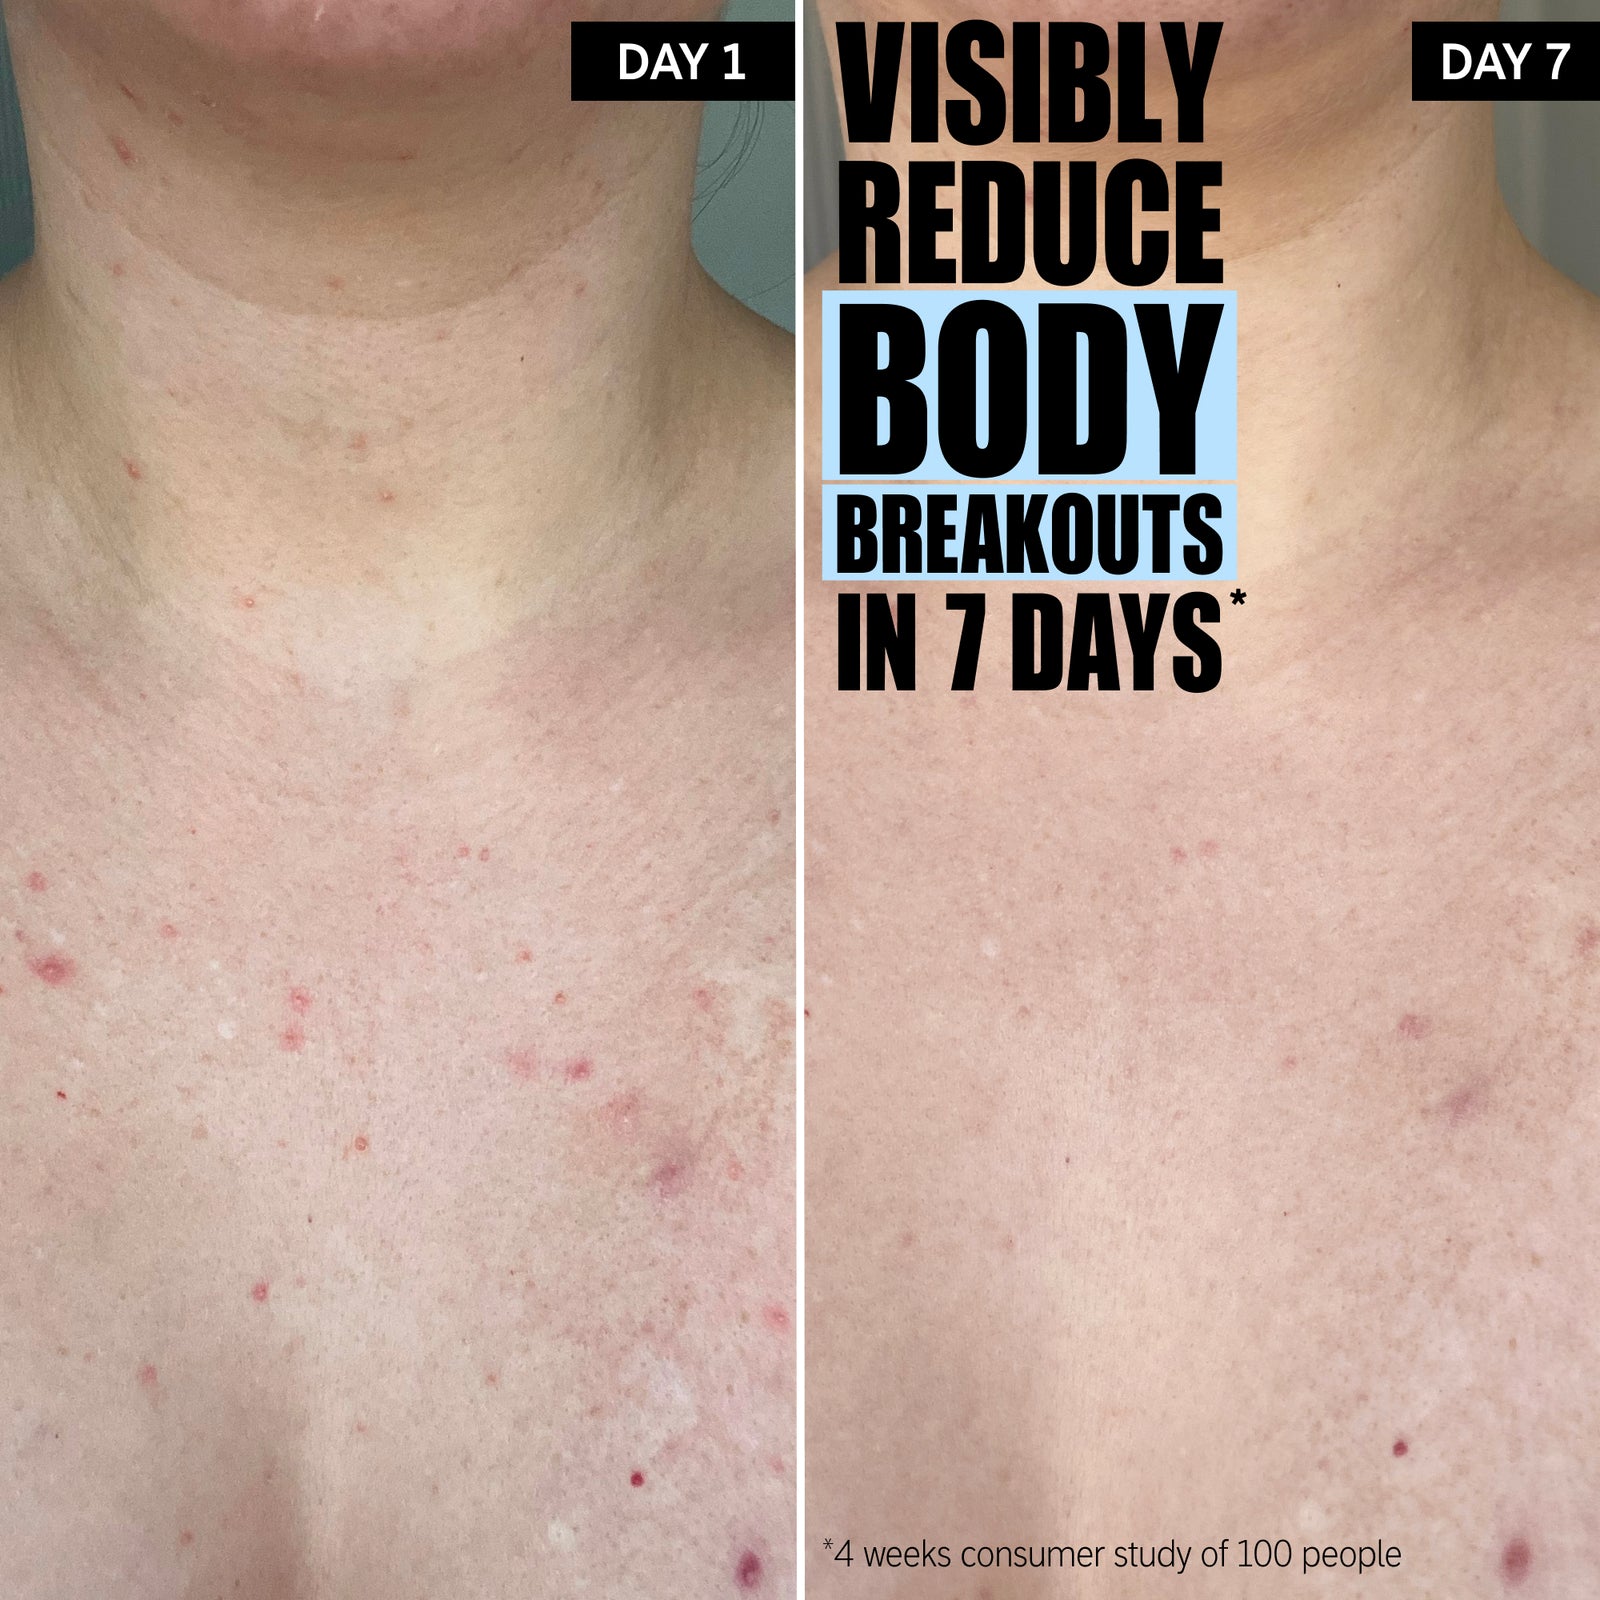 Visibly reduce body breakouts in 7 days*. The difference with 7 days use.